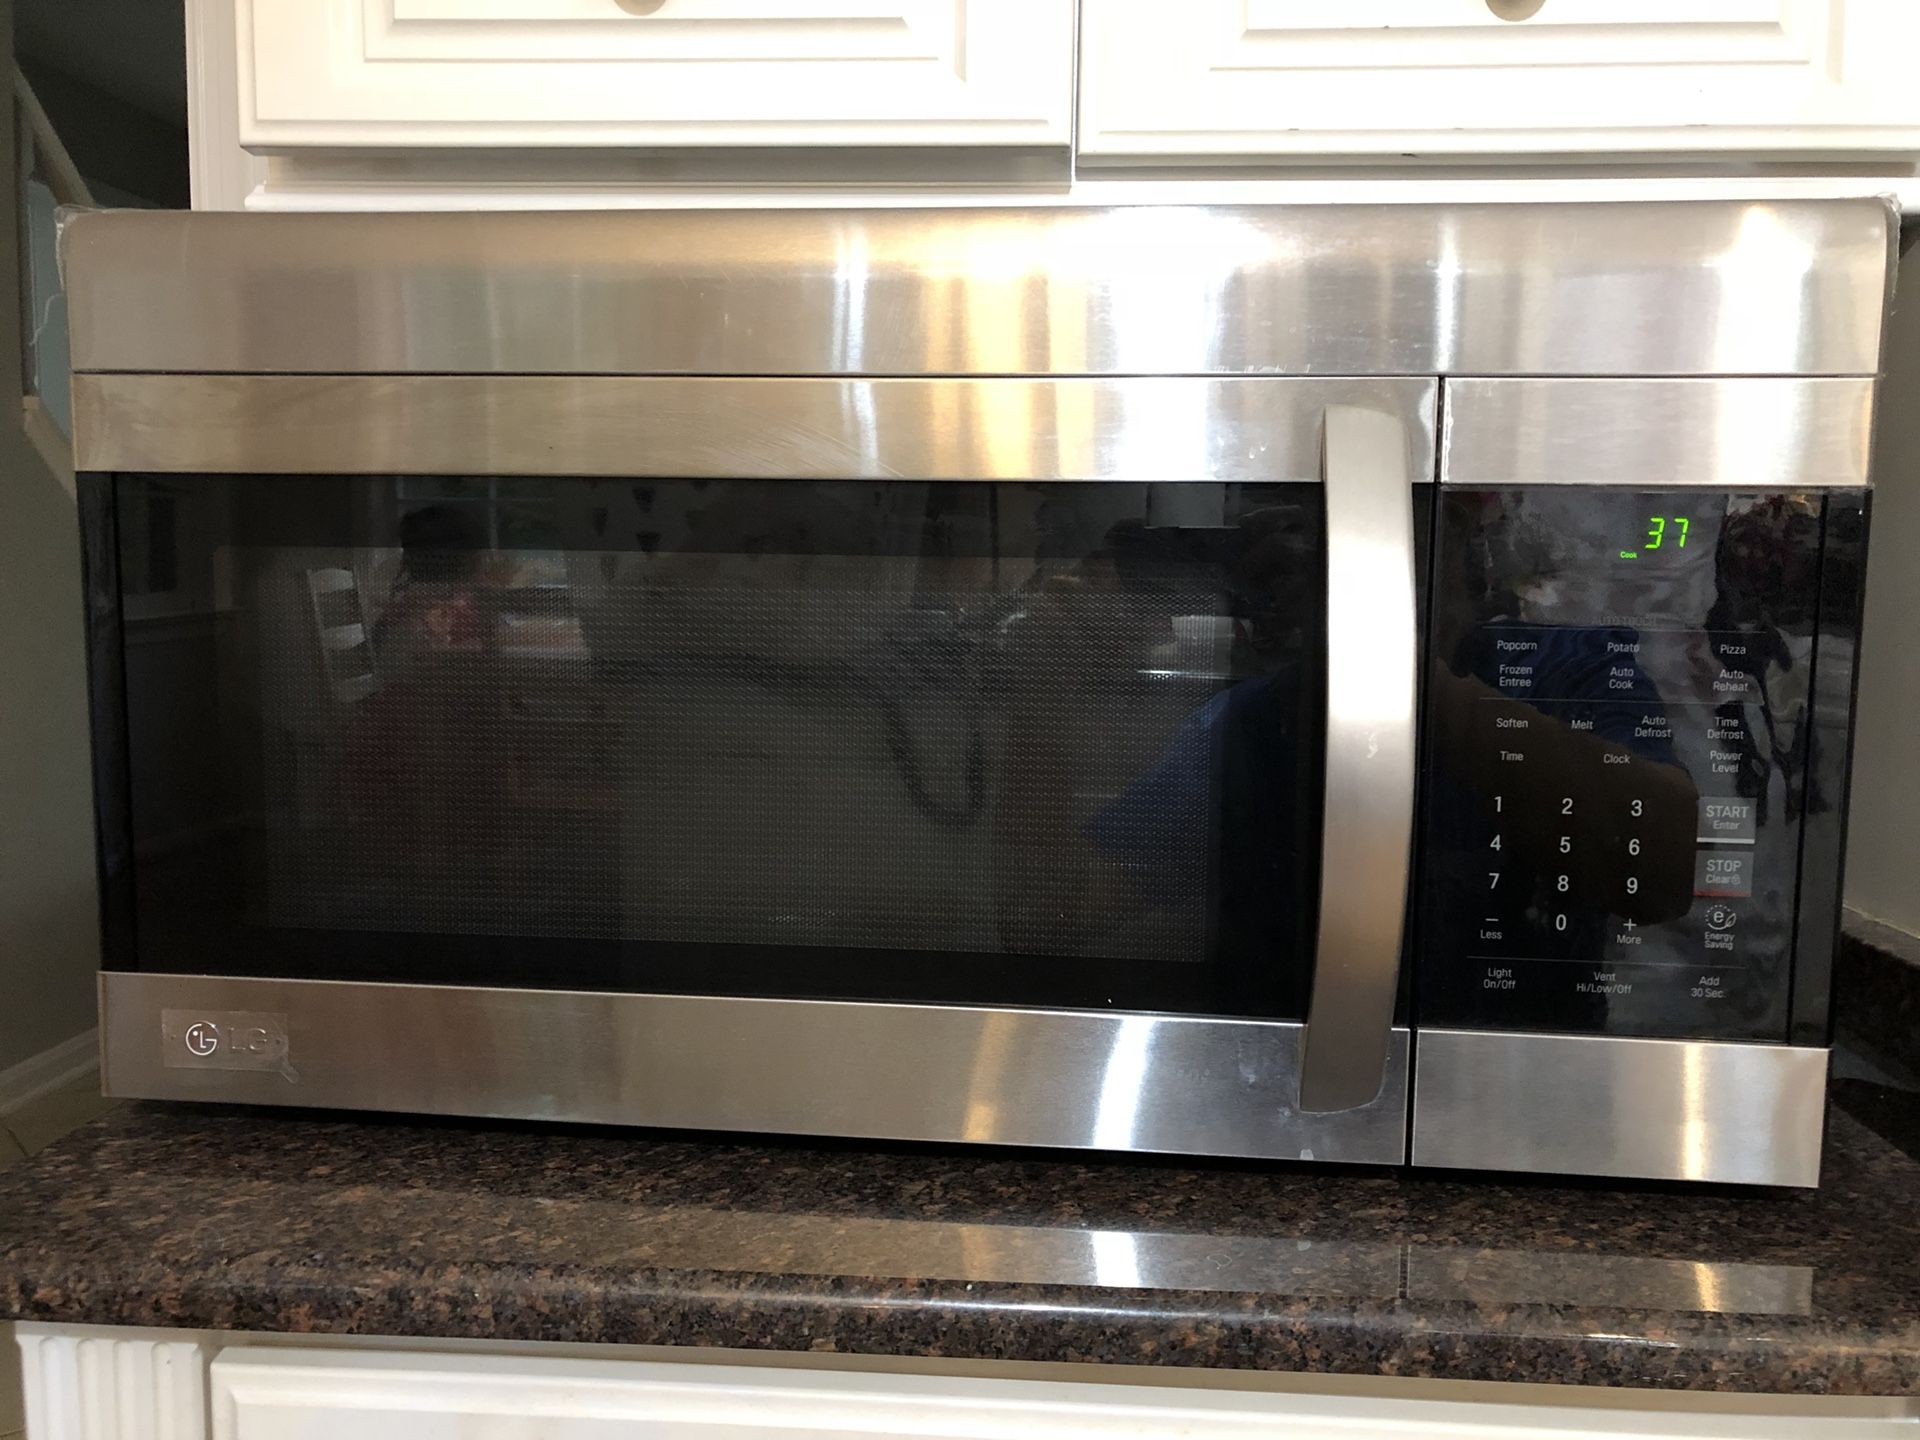 LG 1.7 cu ft over the range microwave oven in stainless steel